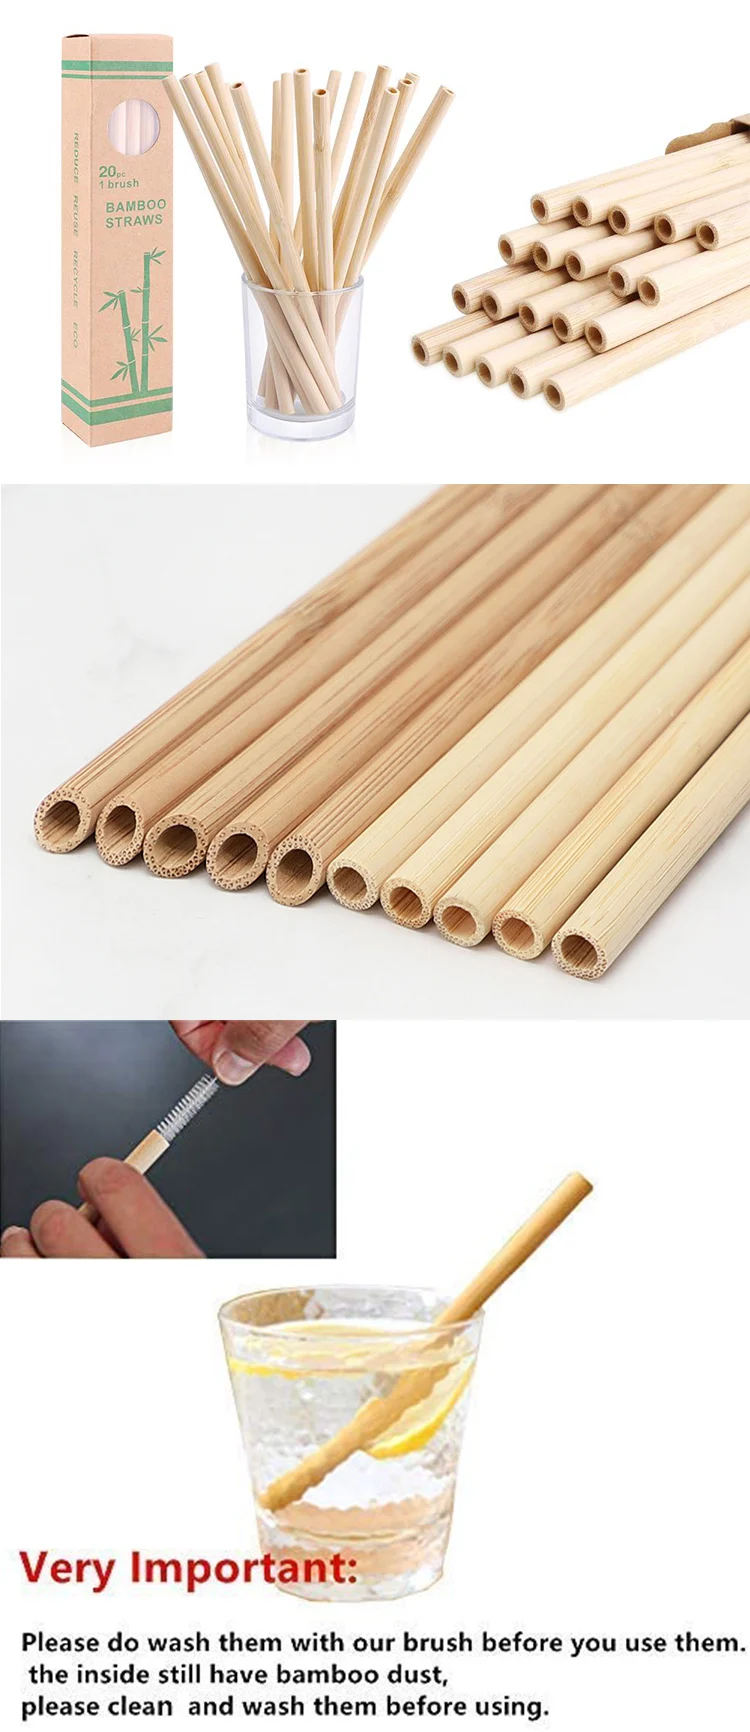 Biodegradable Reed Drinking Straw Natural Eco Reusable Straws Grass